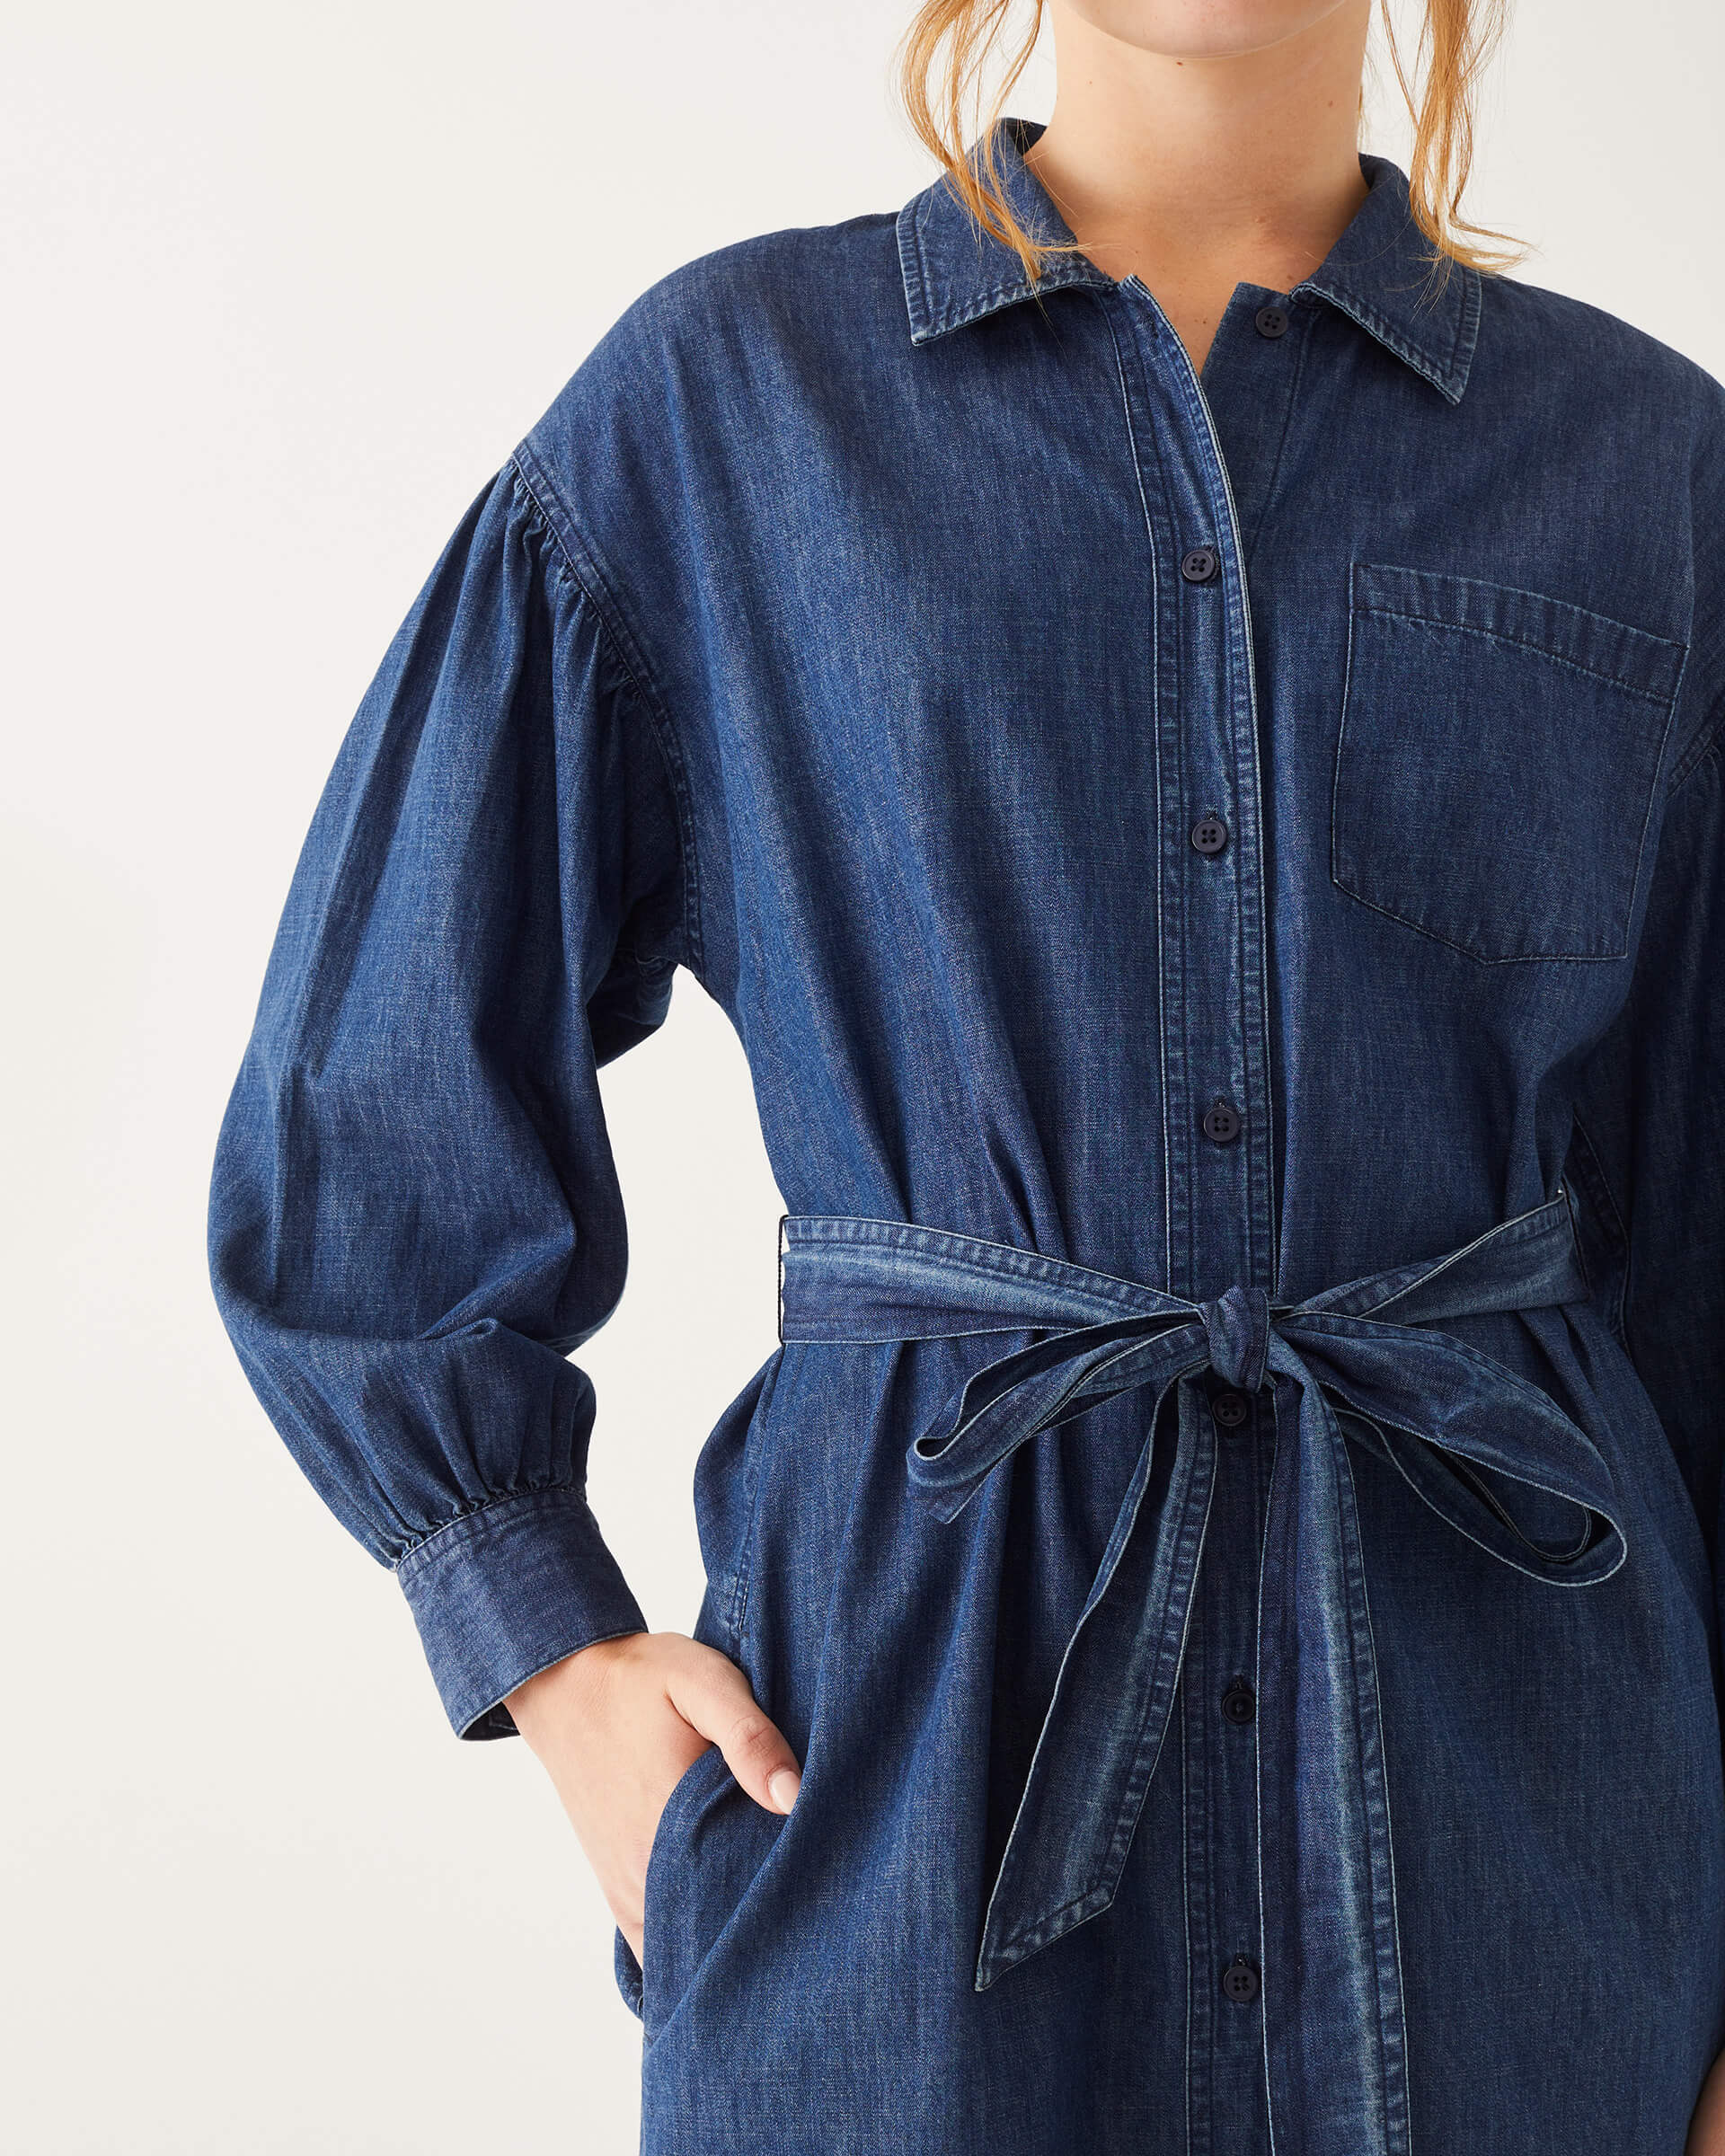 female wearing chambray shirt dress with collar, button-down and belt on a white background